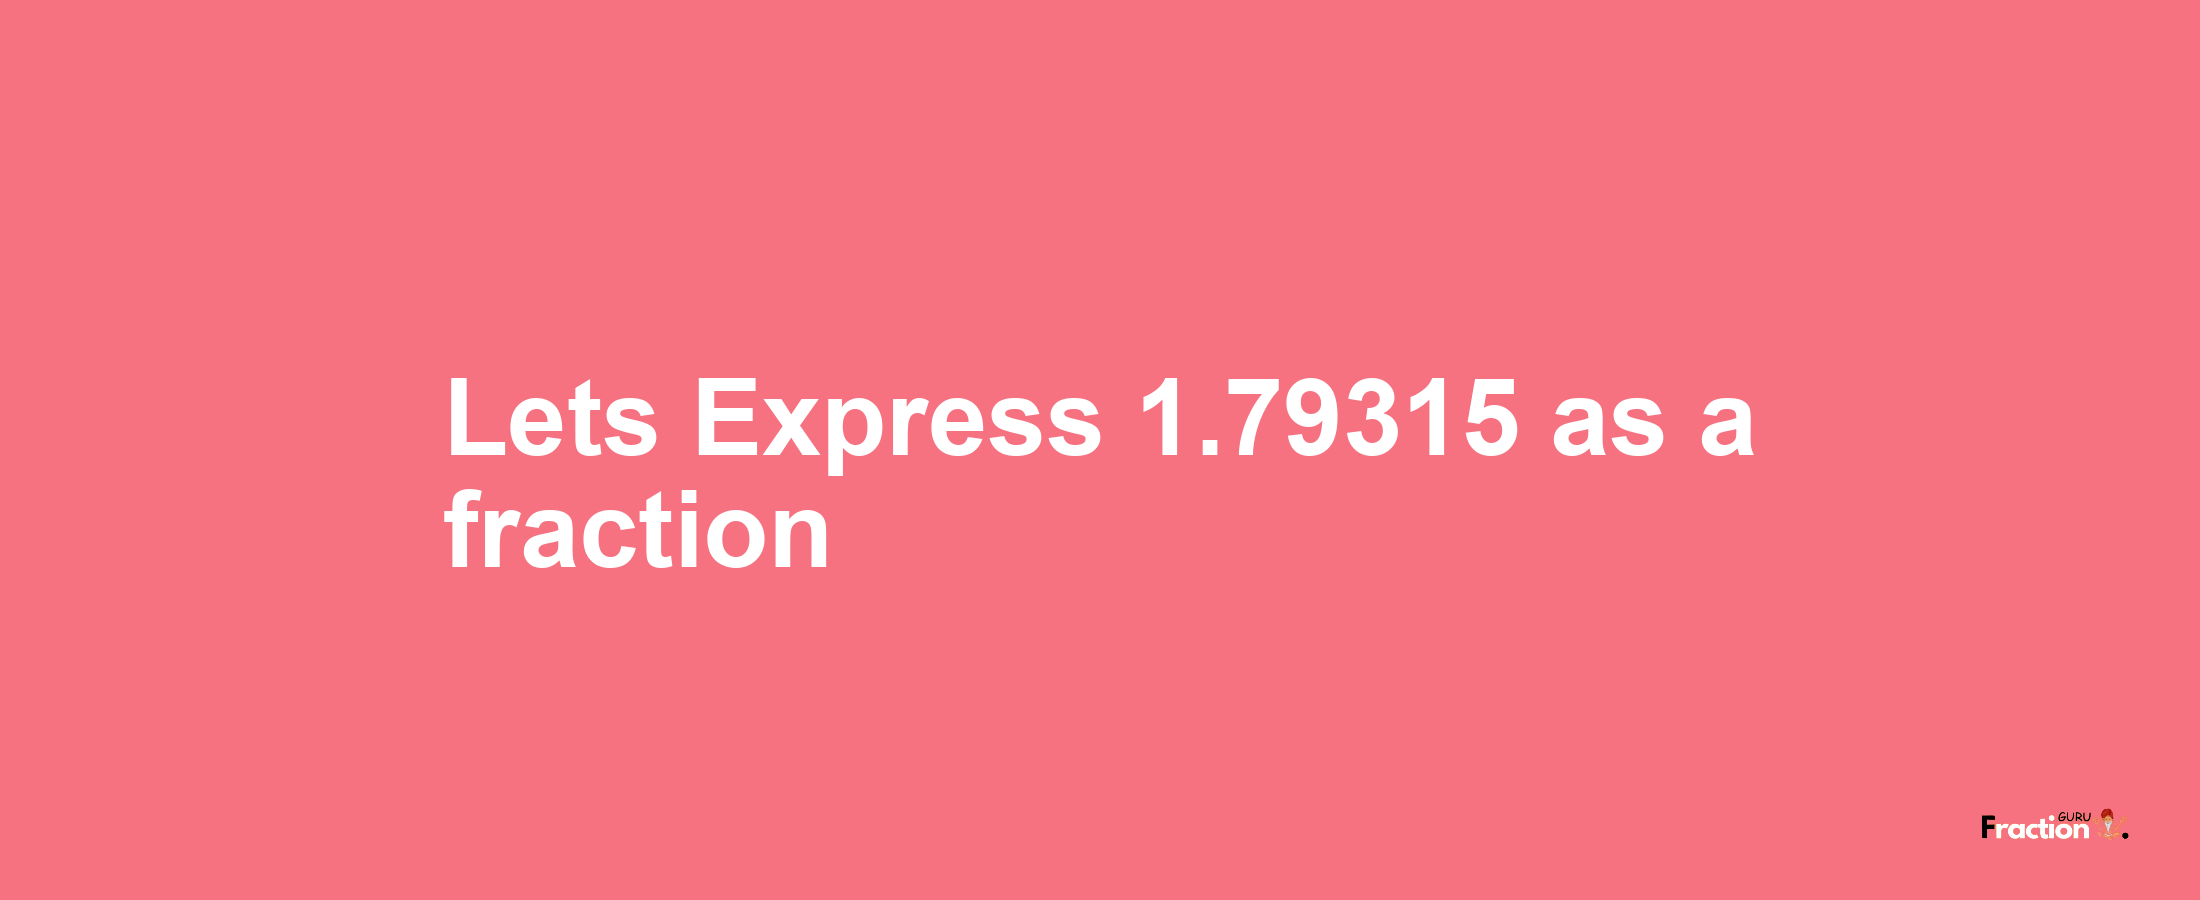 Lets Express 1.79315 as afraction